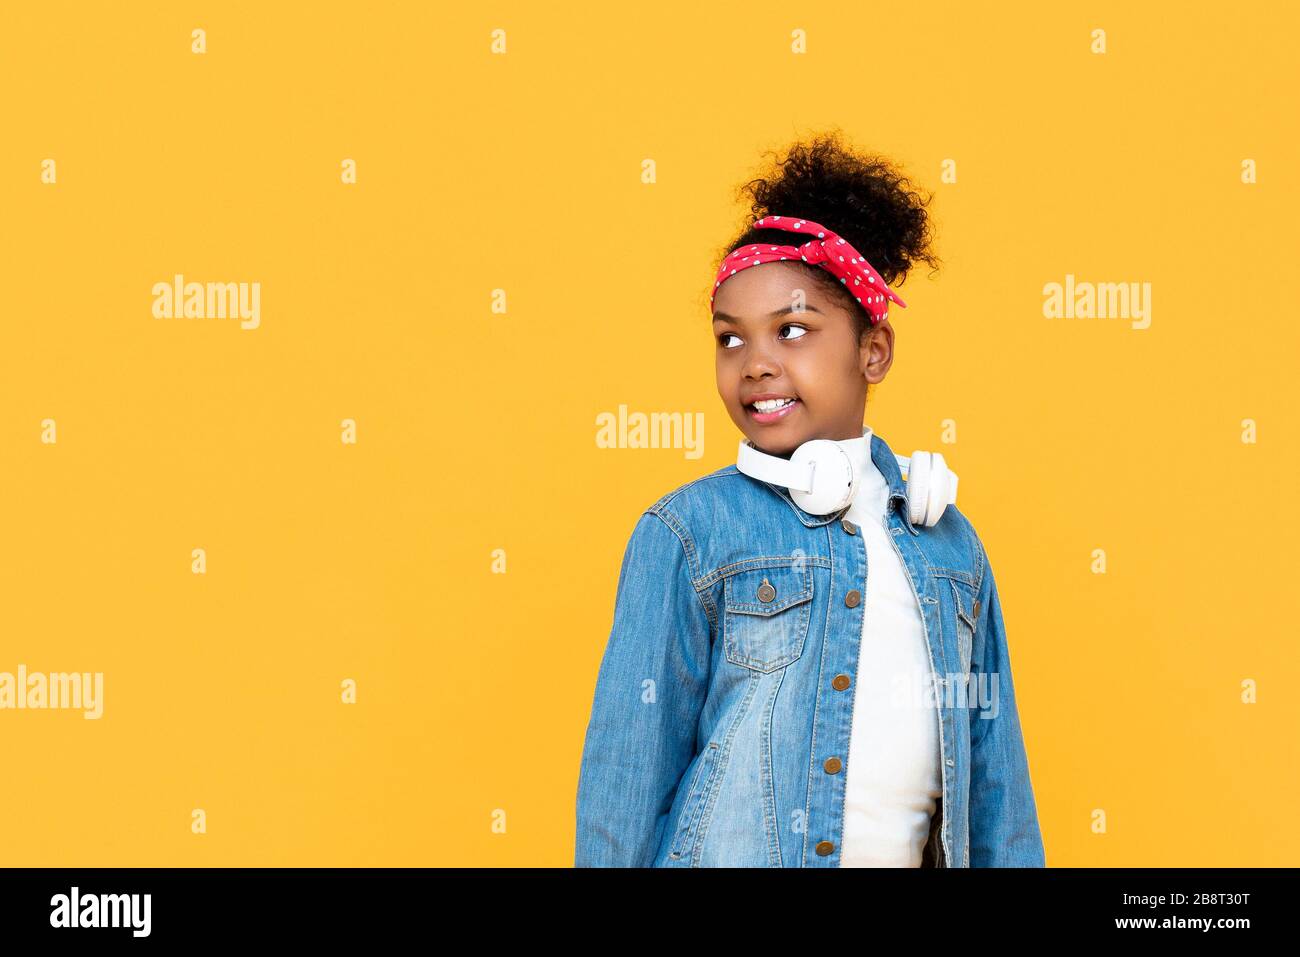 Smiling fashionable mixed raced African girl looking at copy space aside studio shot isolateded on colorful yellow background Stock Photo